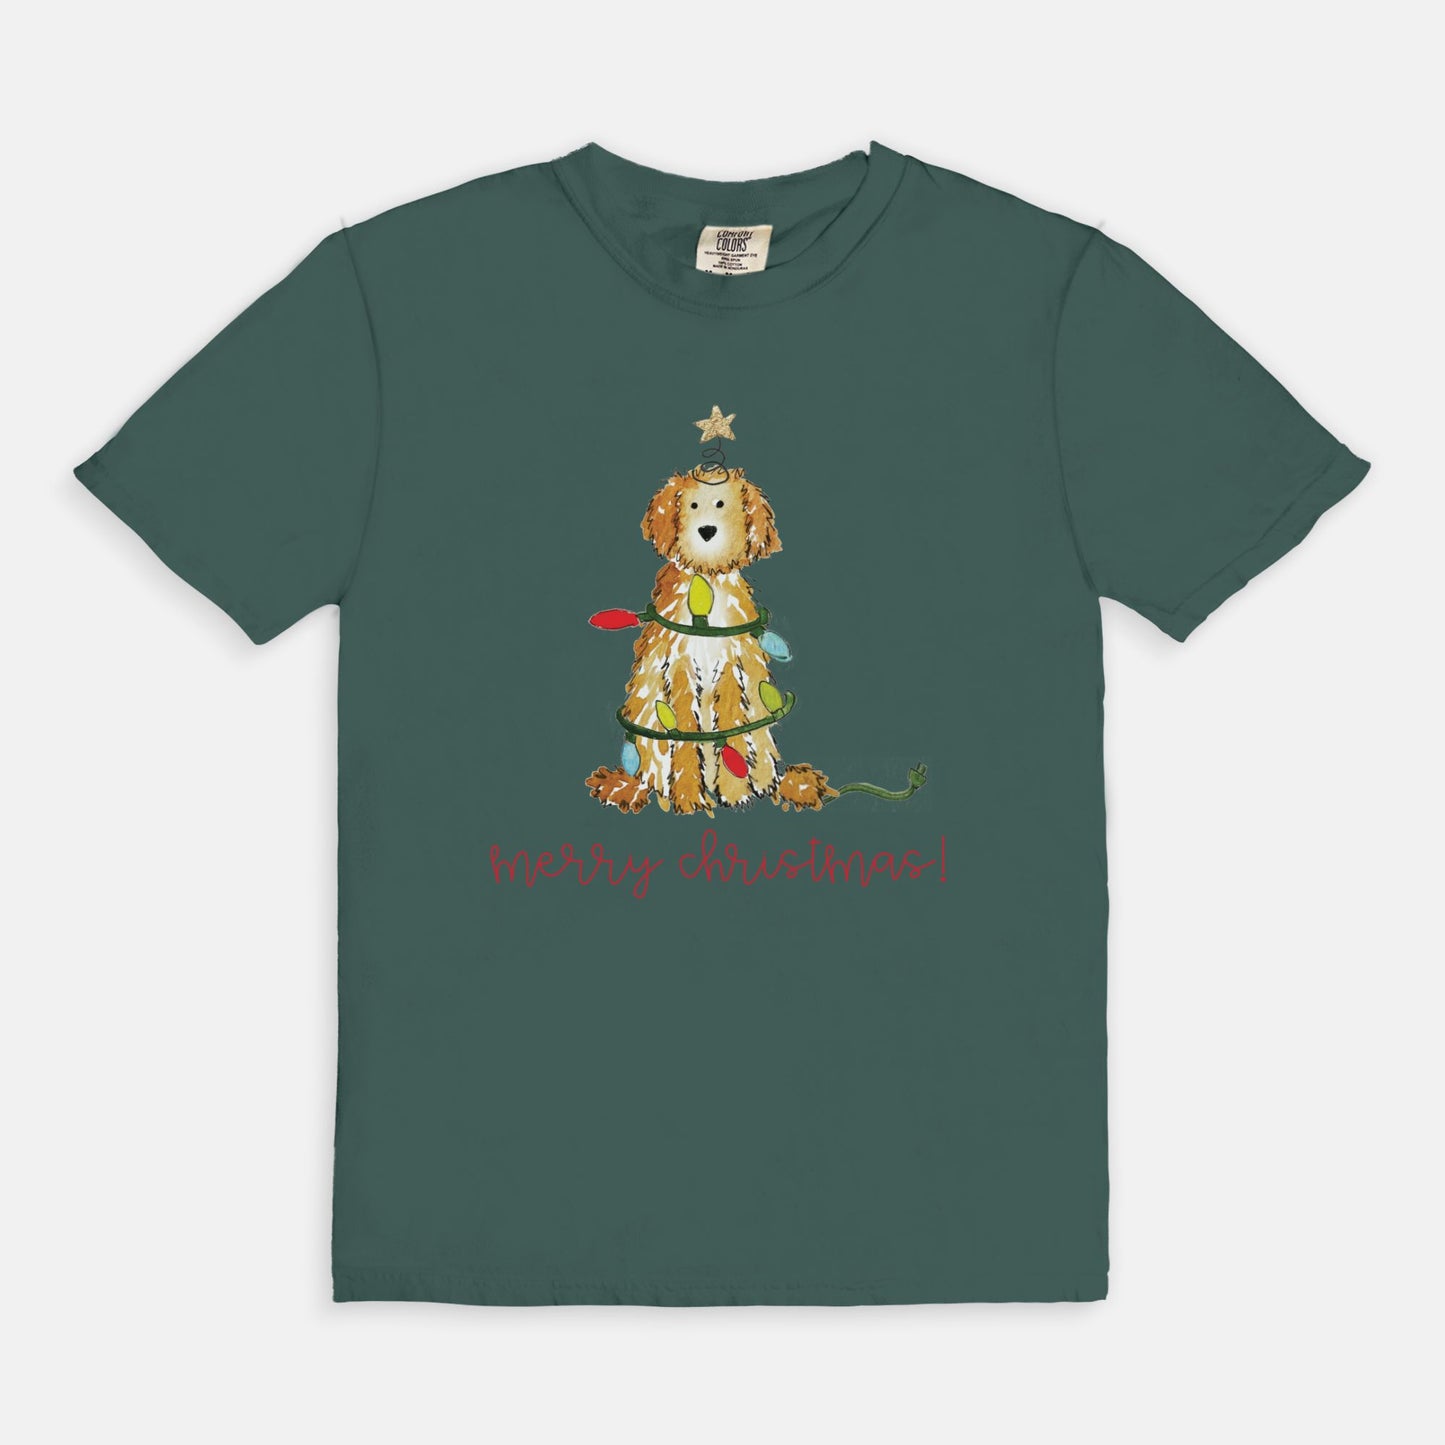 Festive Christmas Apricot and Cream Doodle Comfort Colors Tee